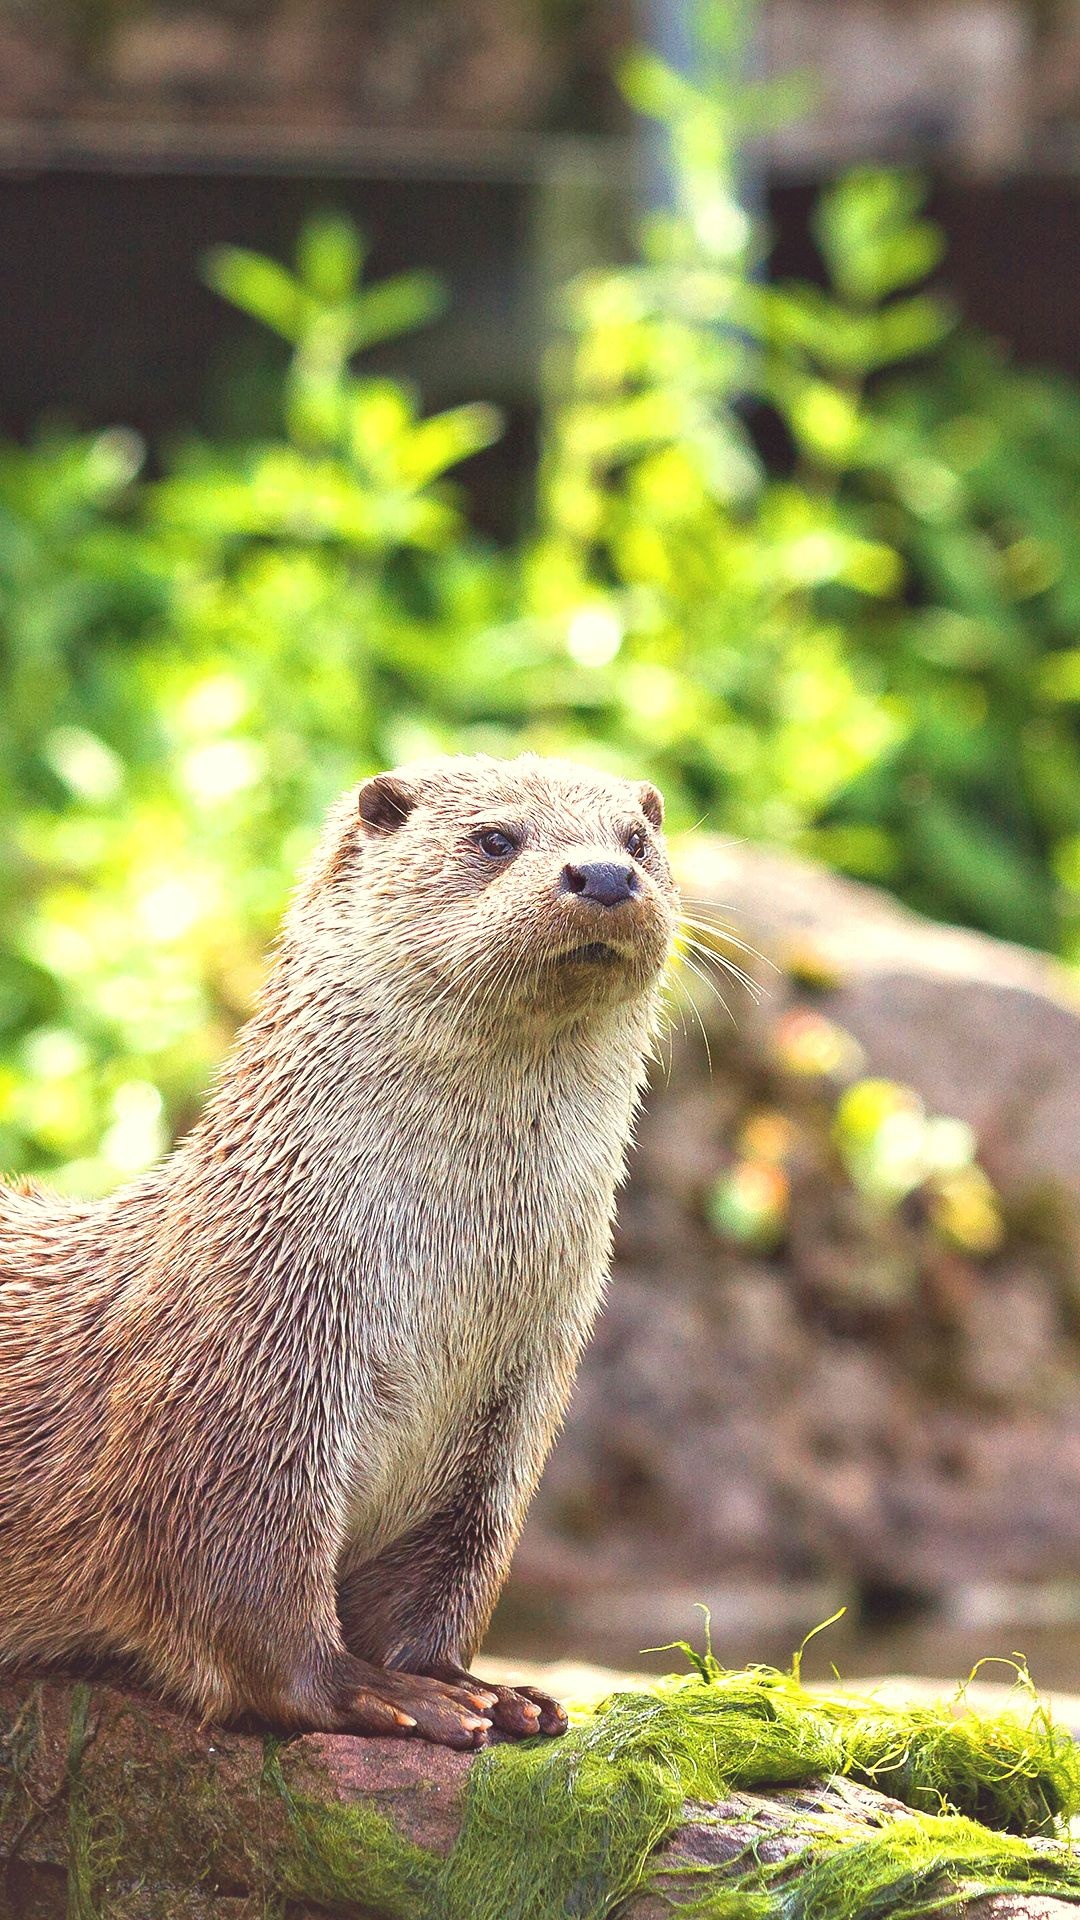 User-shared otter wallpapers, Diverse otter selection, Community's otter appreciation, Contribute to the collection, 1080x1920 Full HD Handy